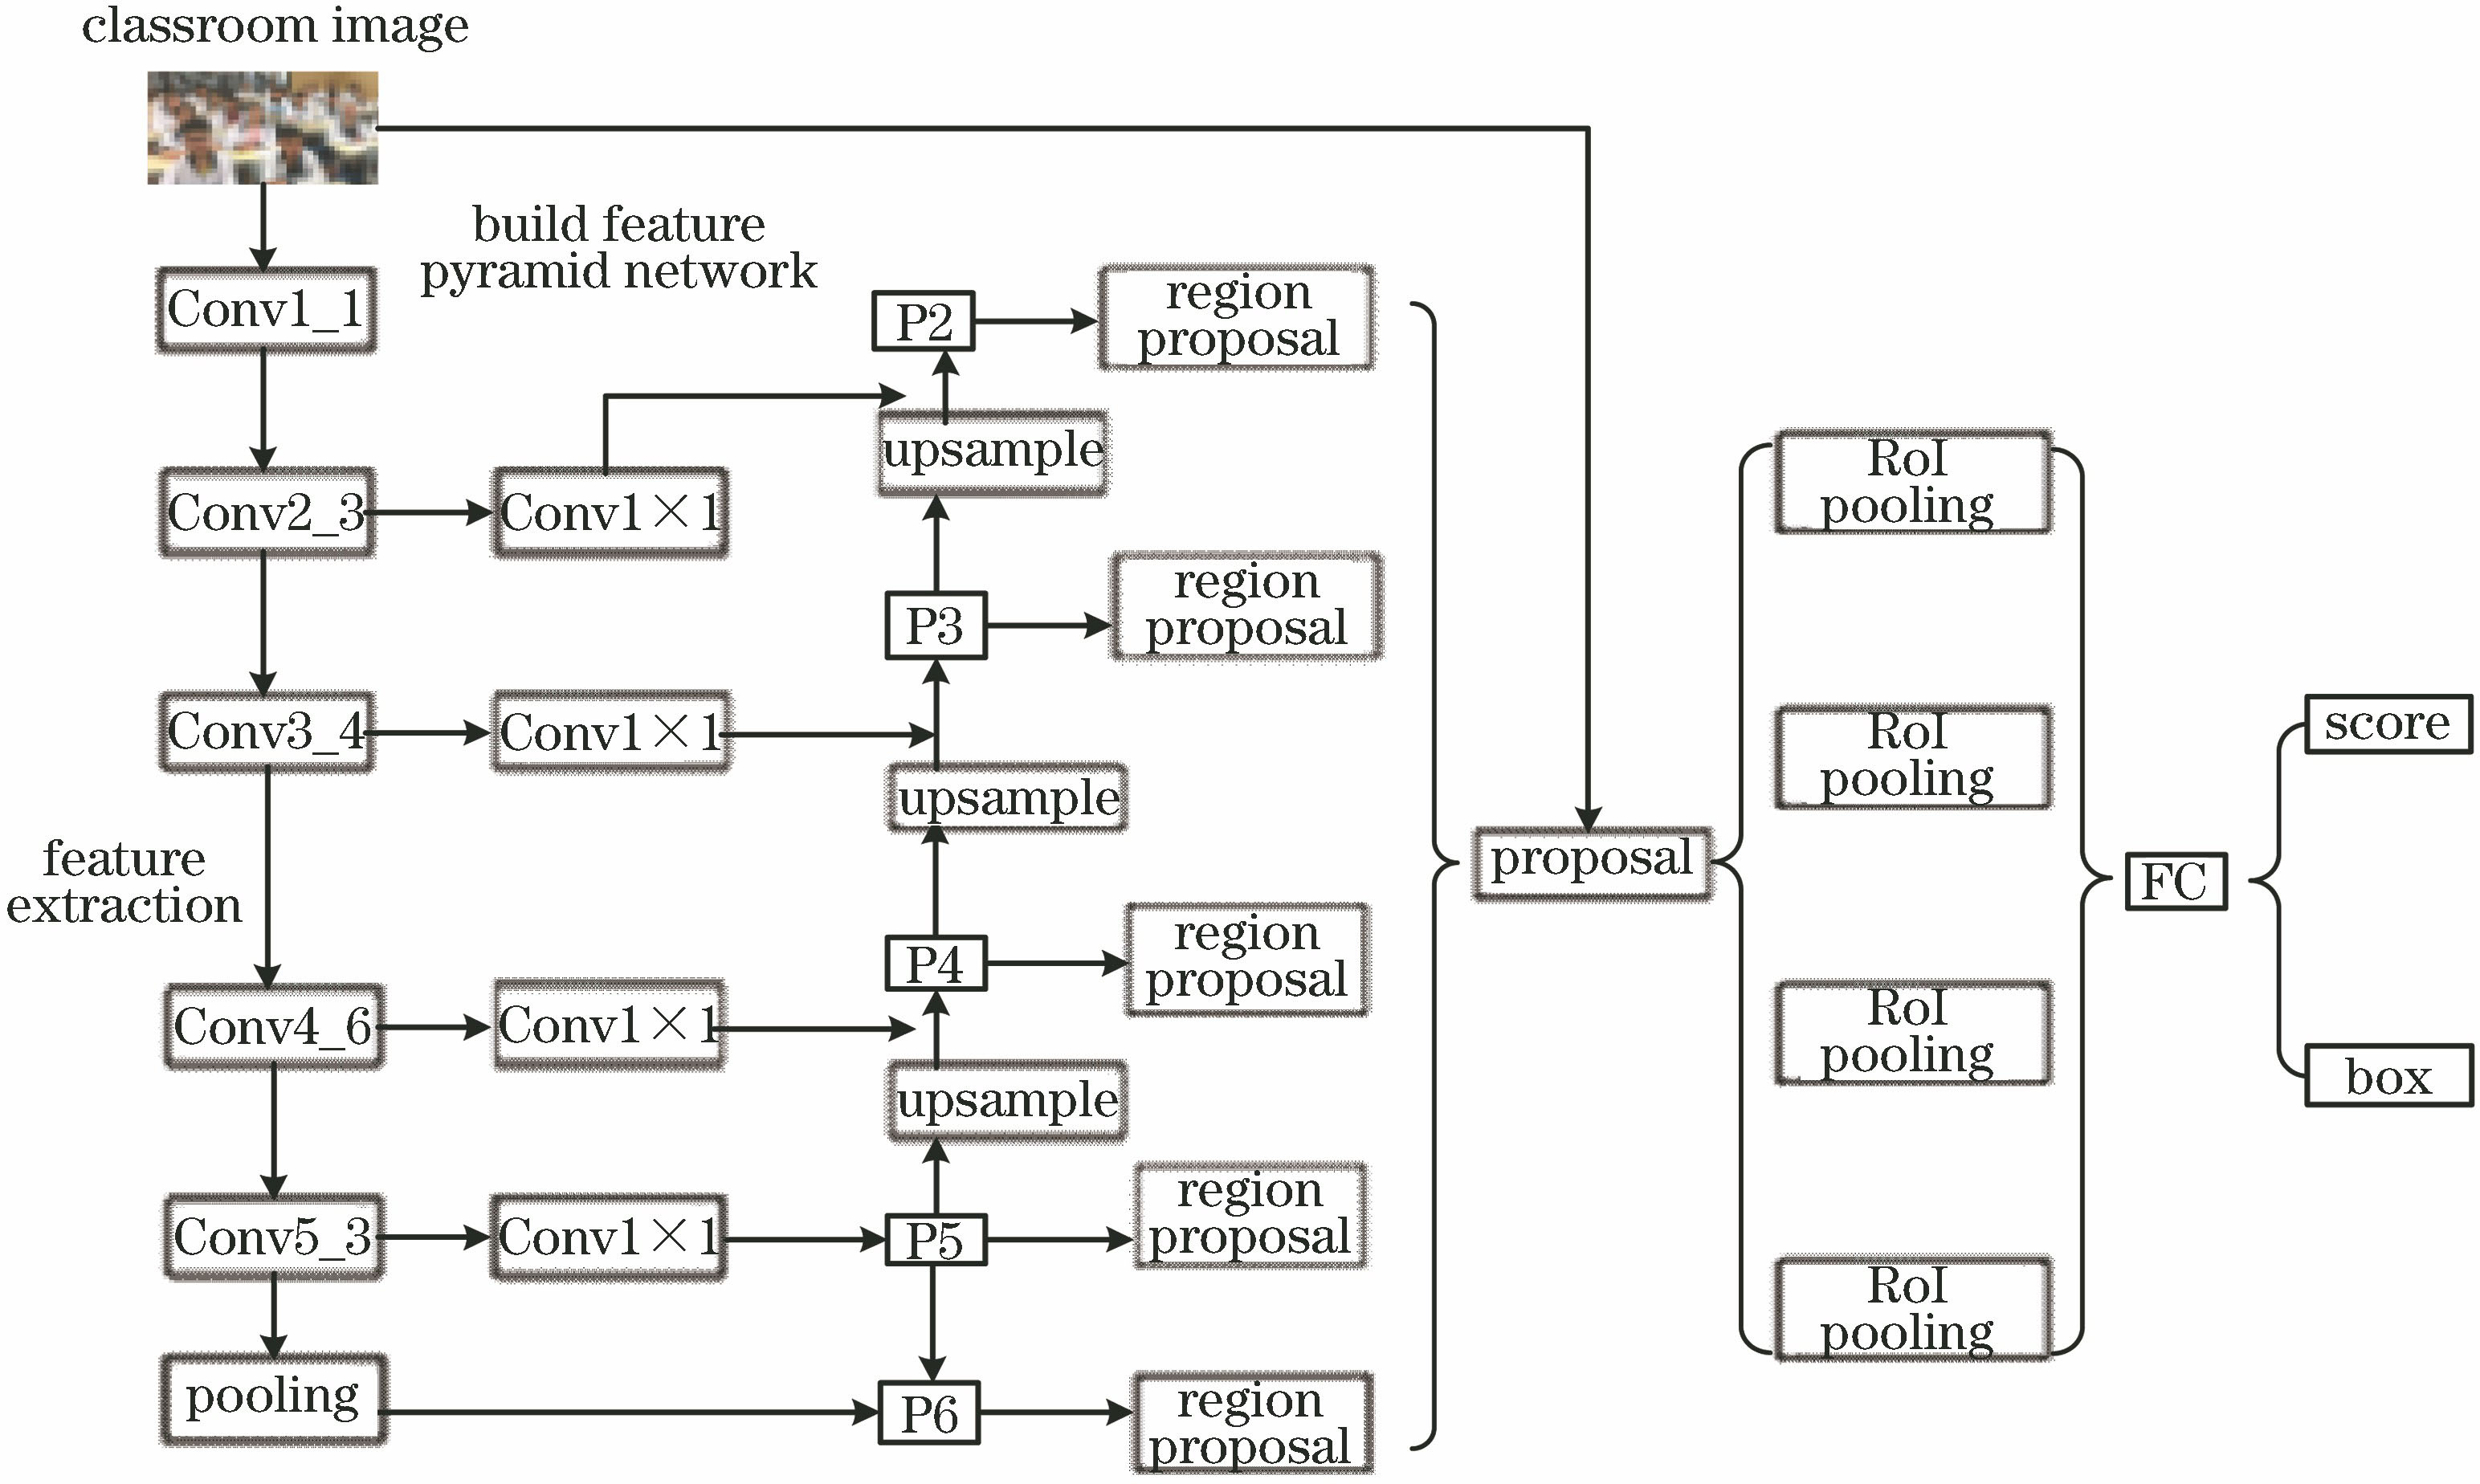 Overall network structure of classroom face detection algorithm